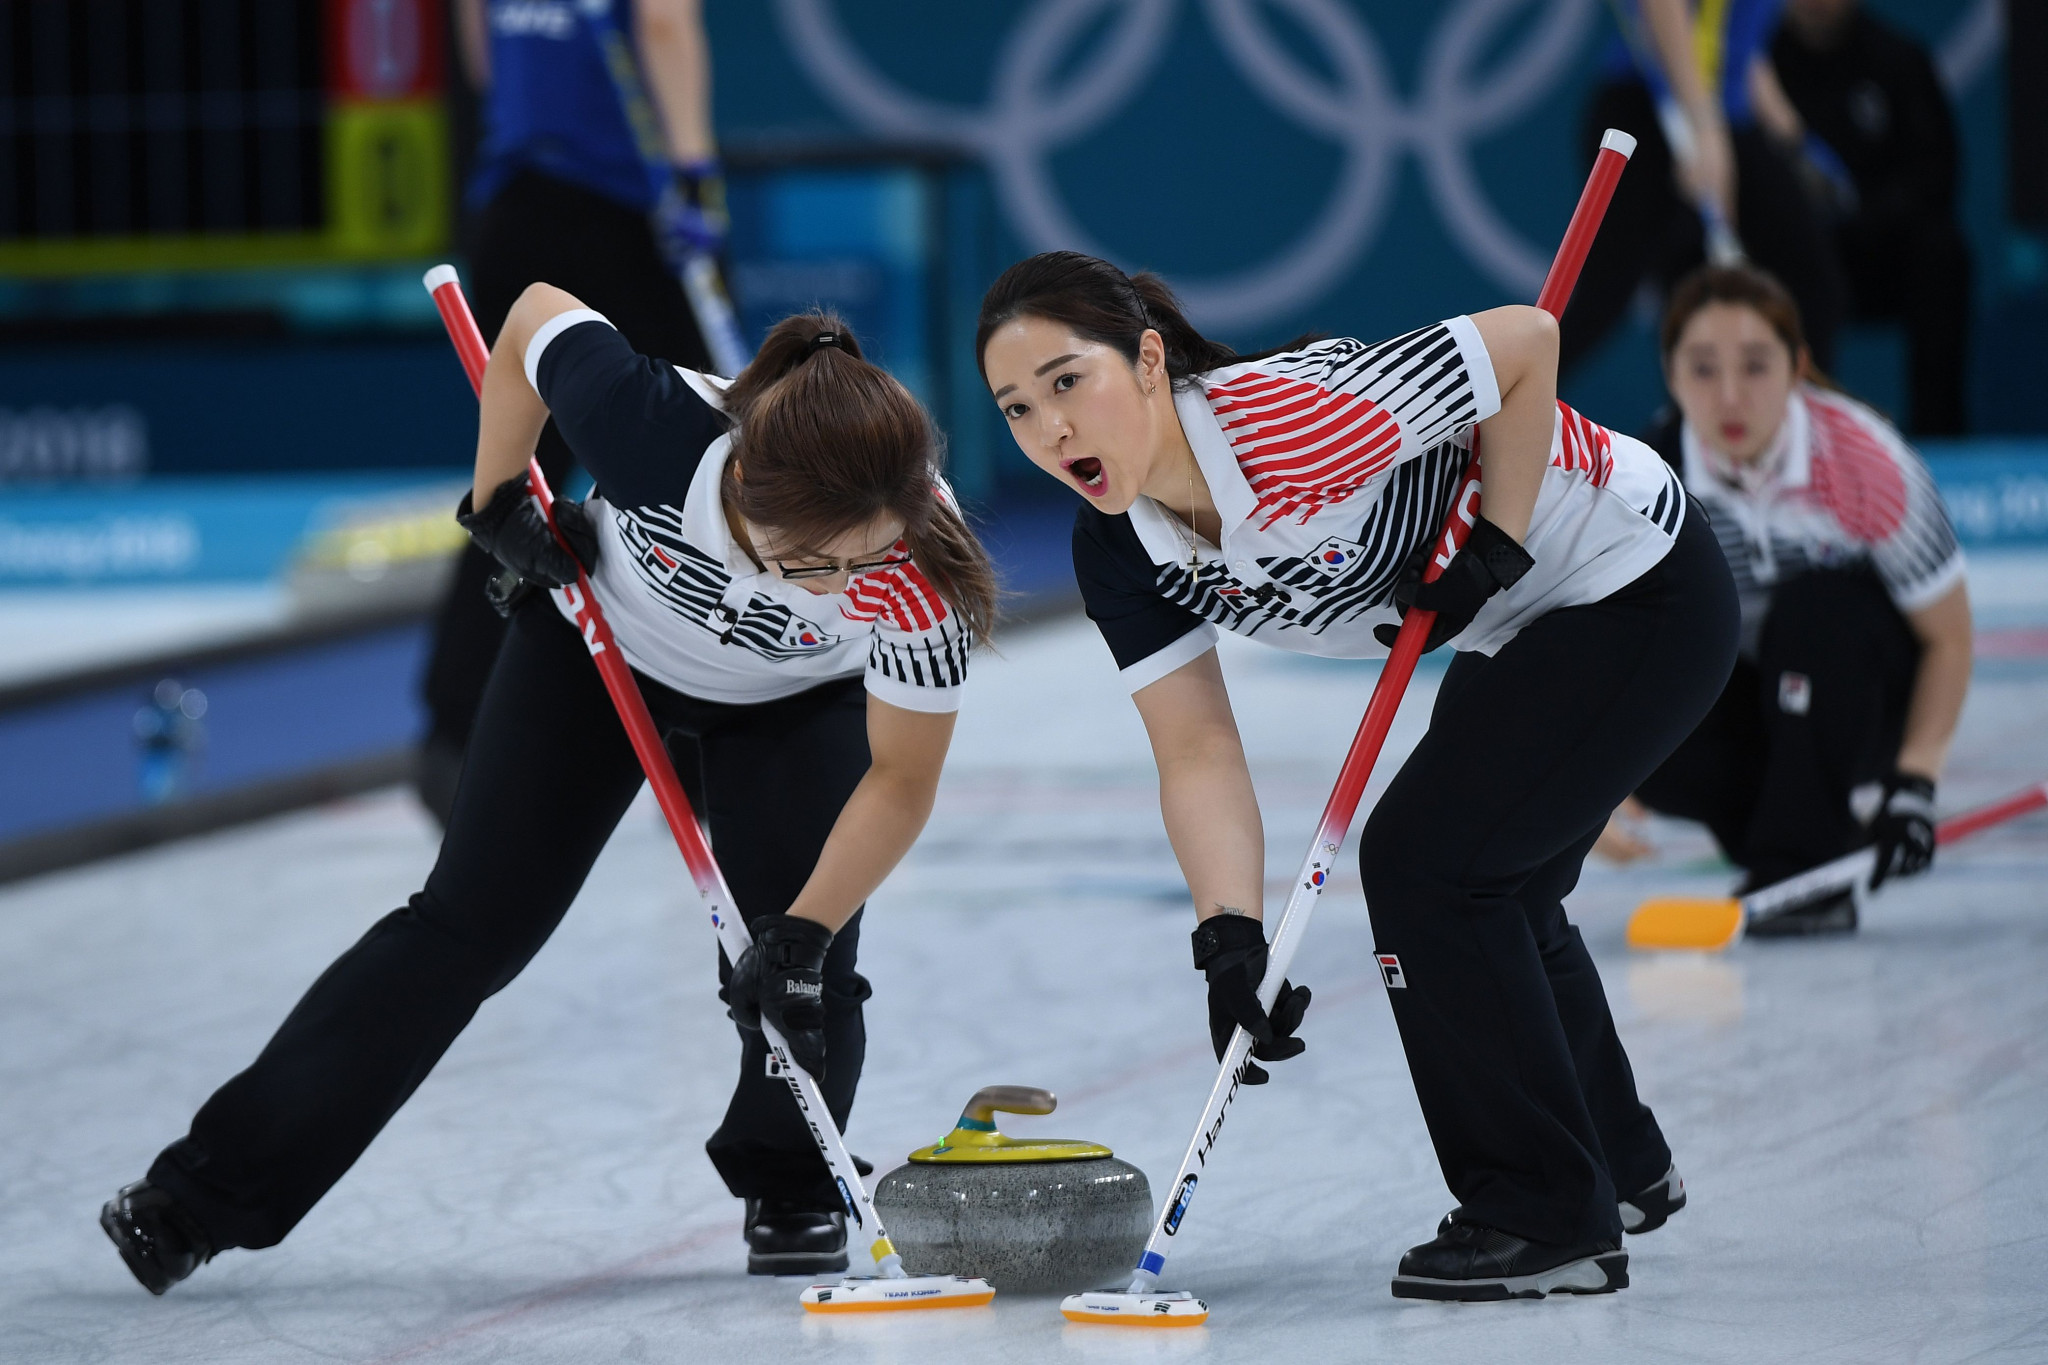 The curling proved very popular at the Pyeongchang Winter Olympics earlier this year, with the South Korean women eventually claiming the silver medal ©Getty Images